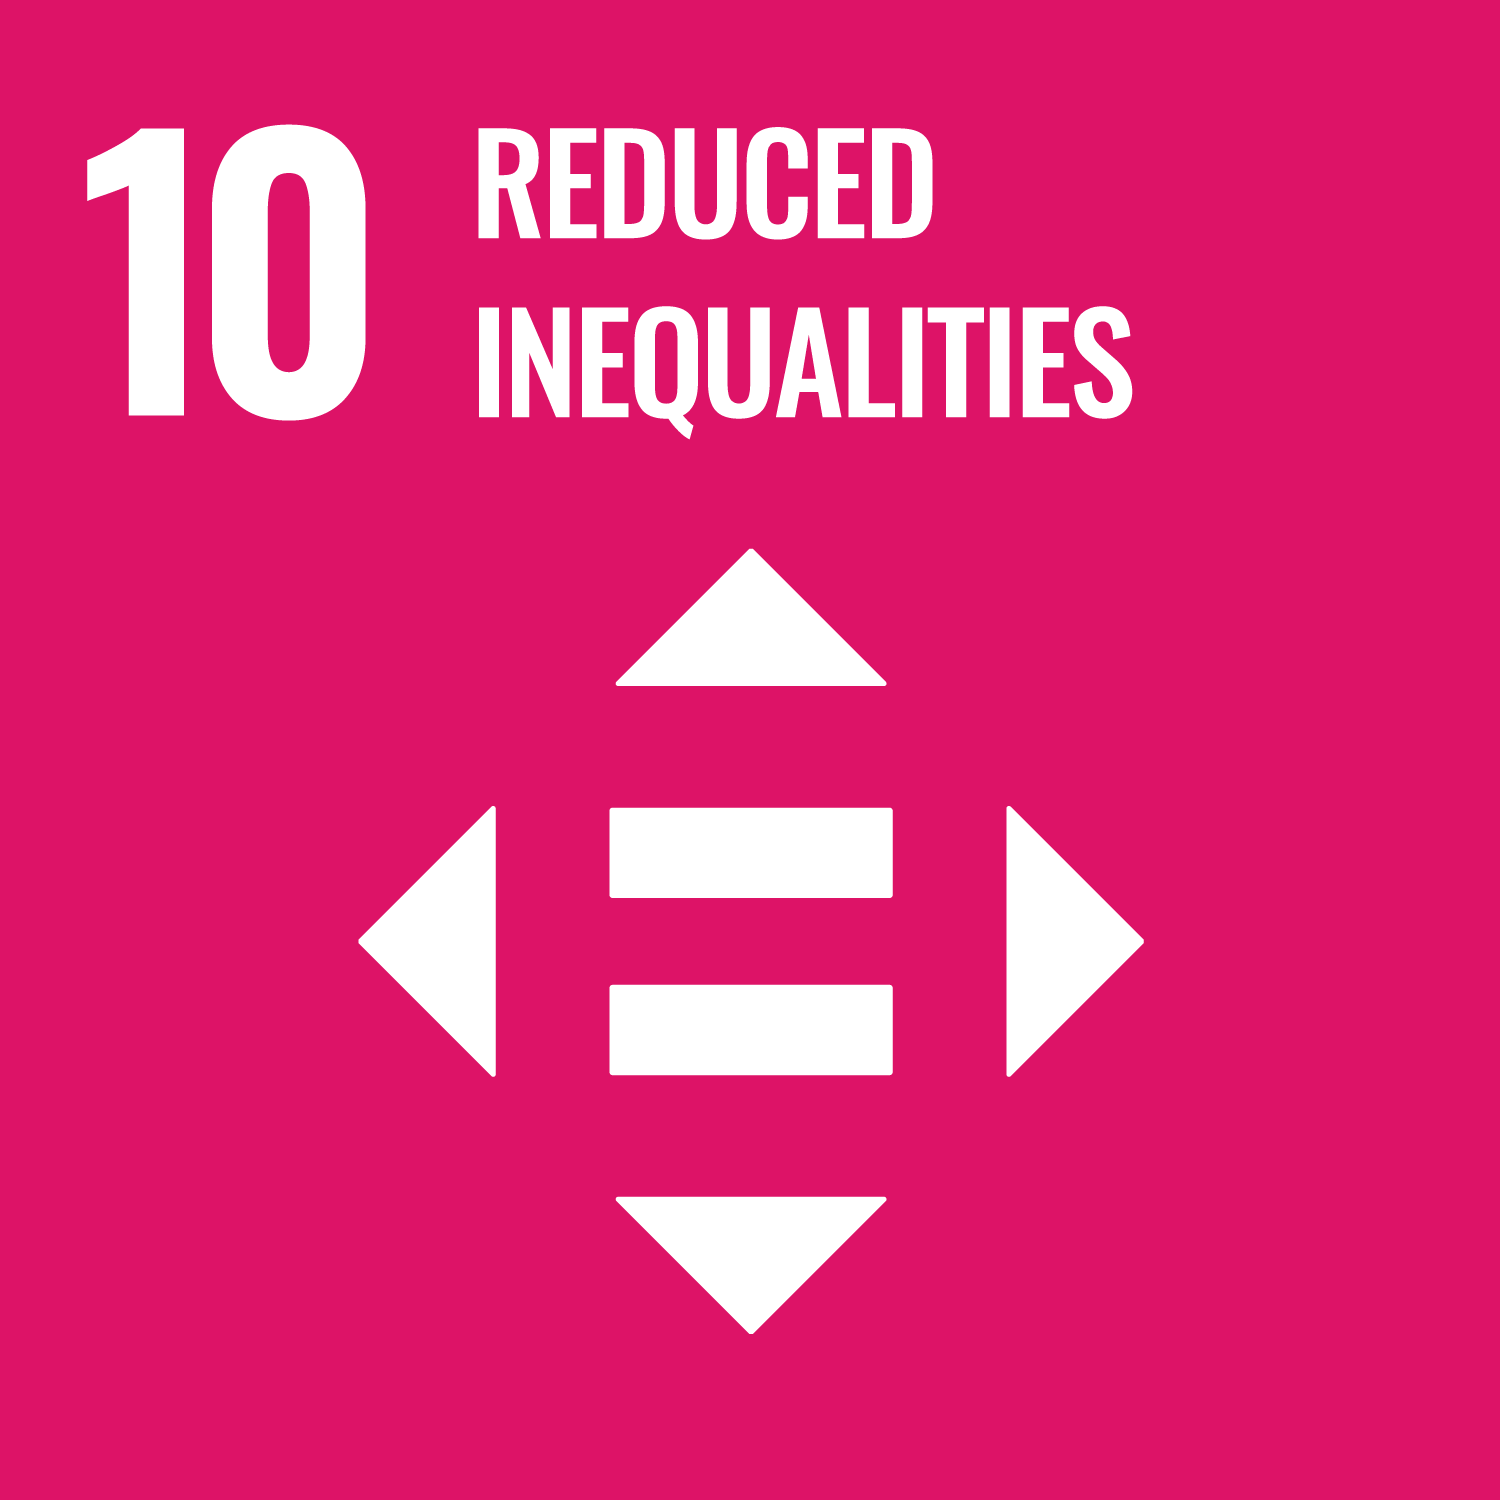 United Nations Sustainable Development Goal Number 10 Reduced Inequalities.